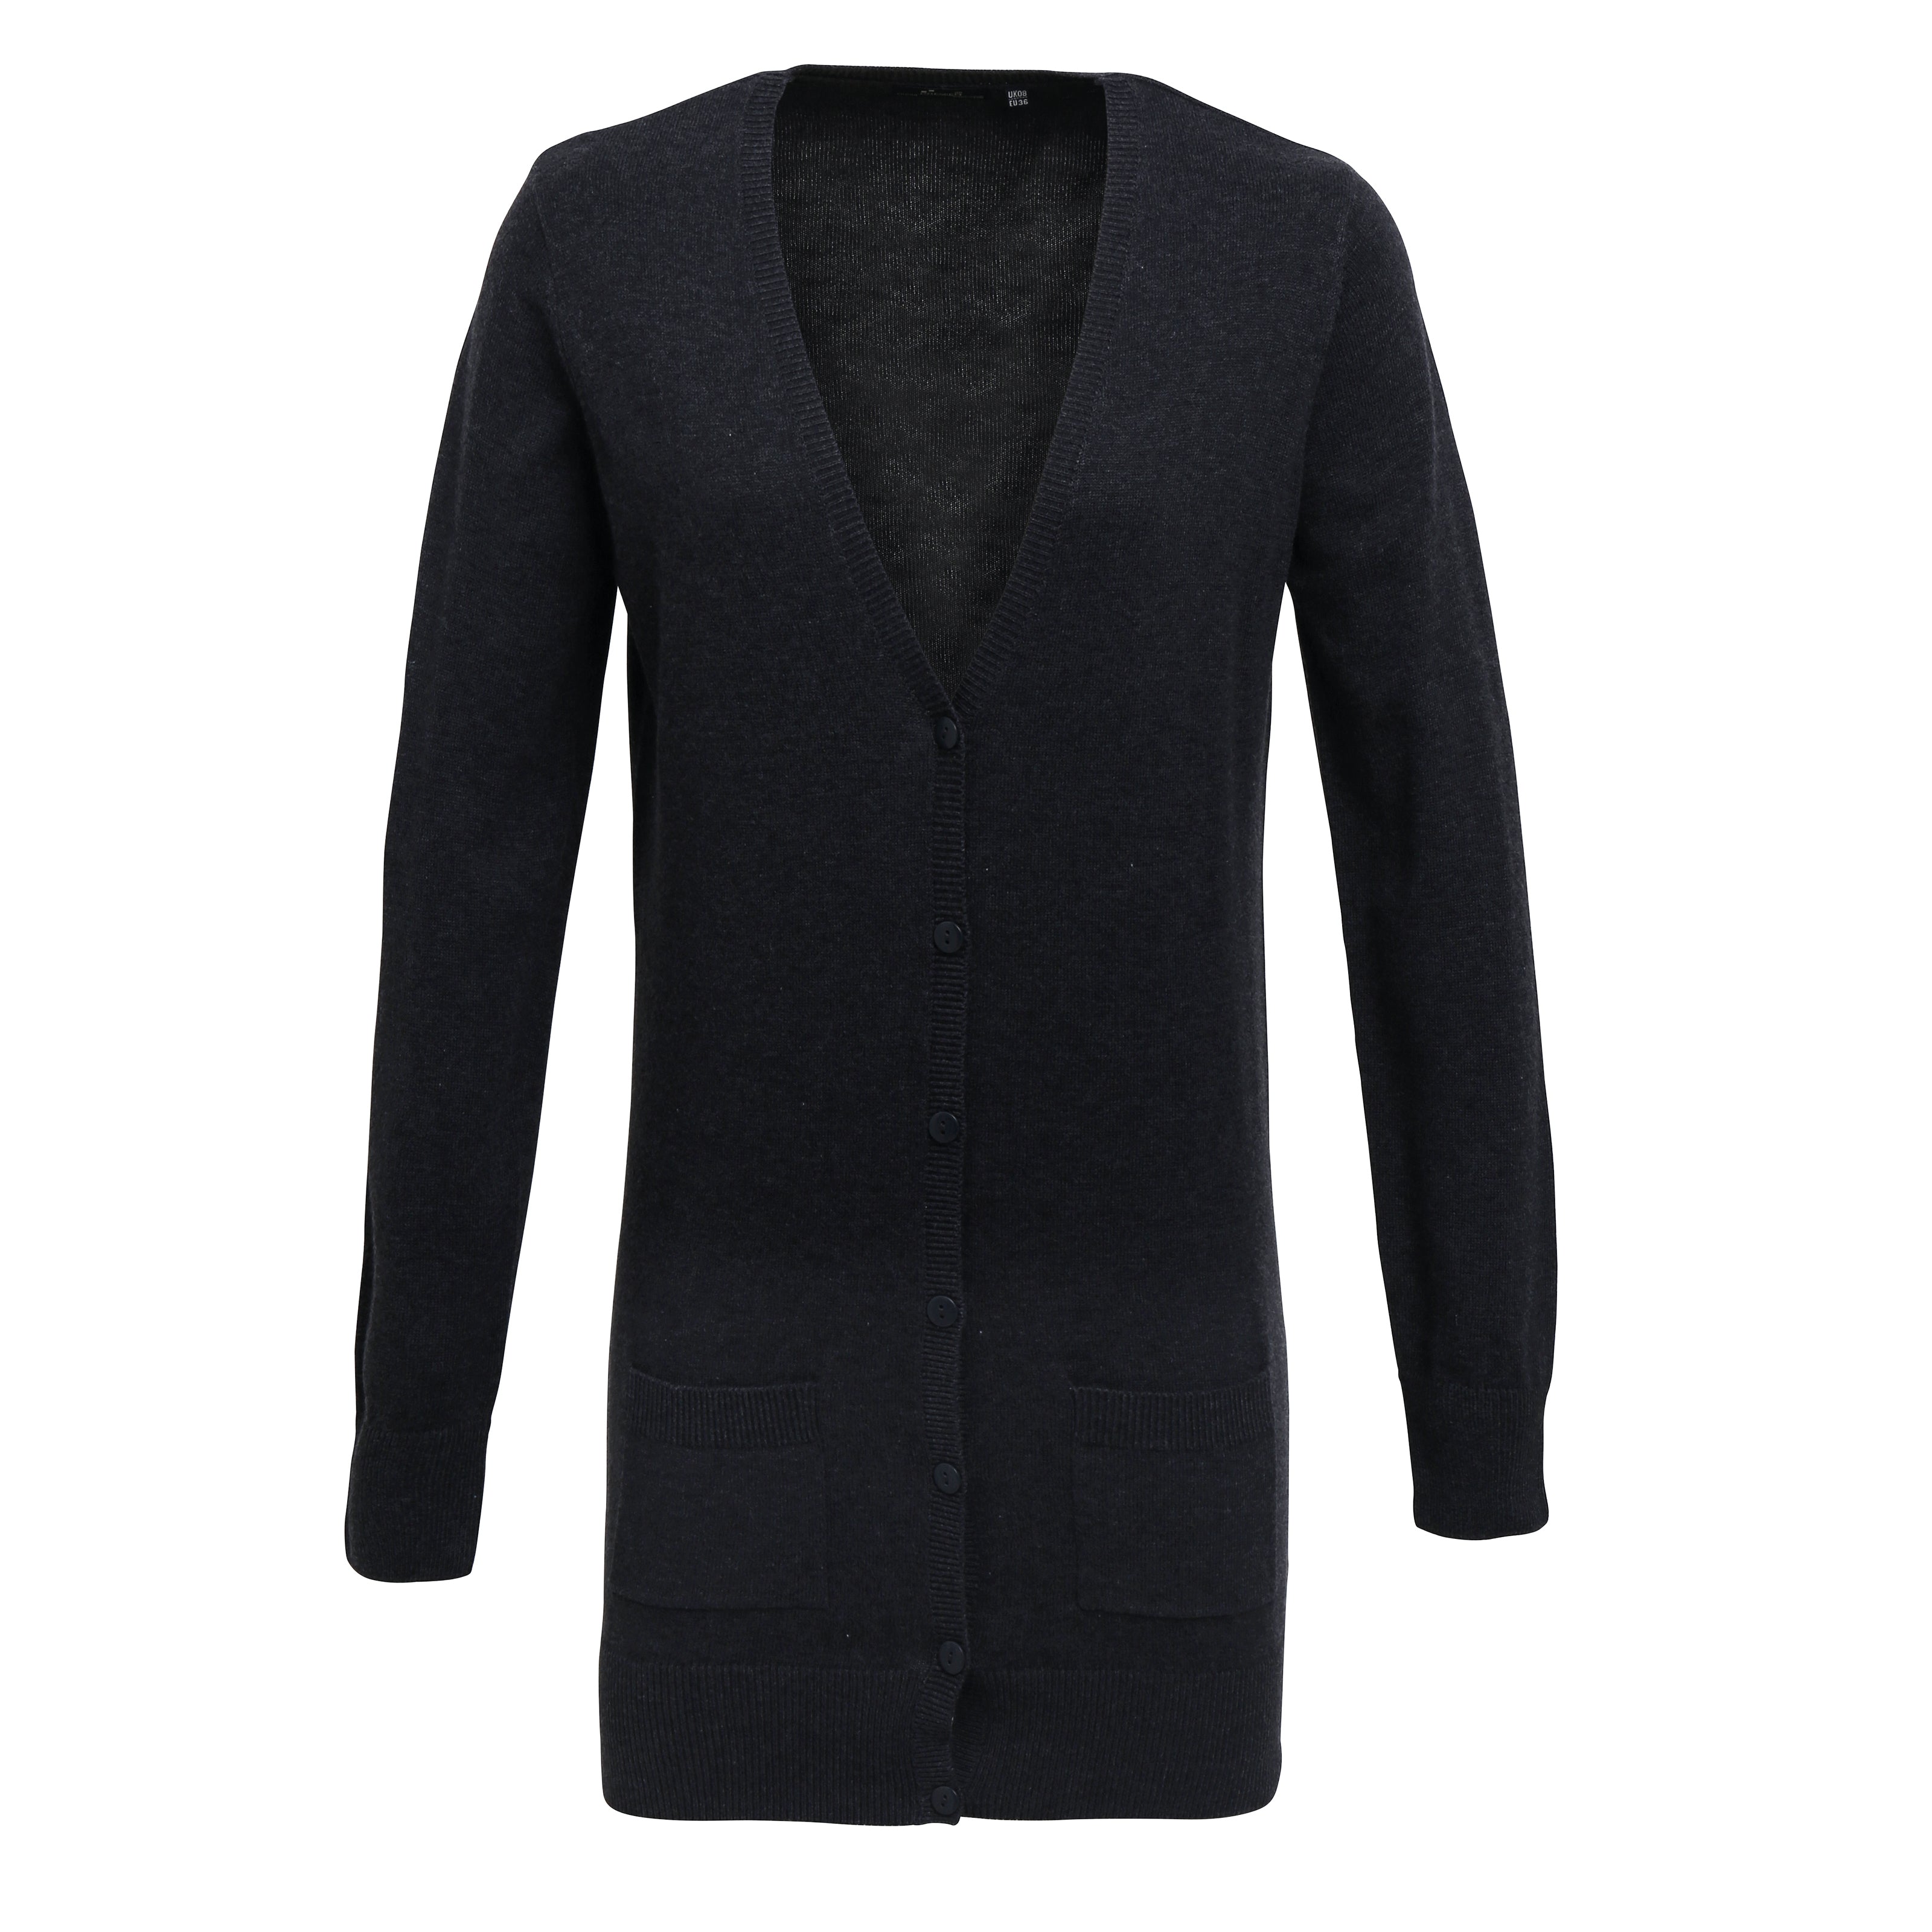 Women's longline knitted cardigan - Premier Collection